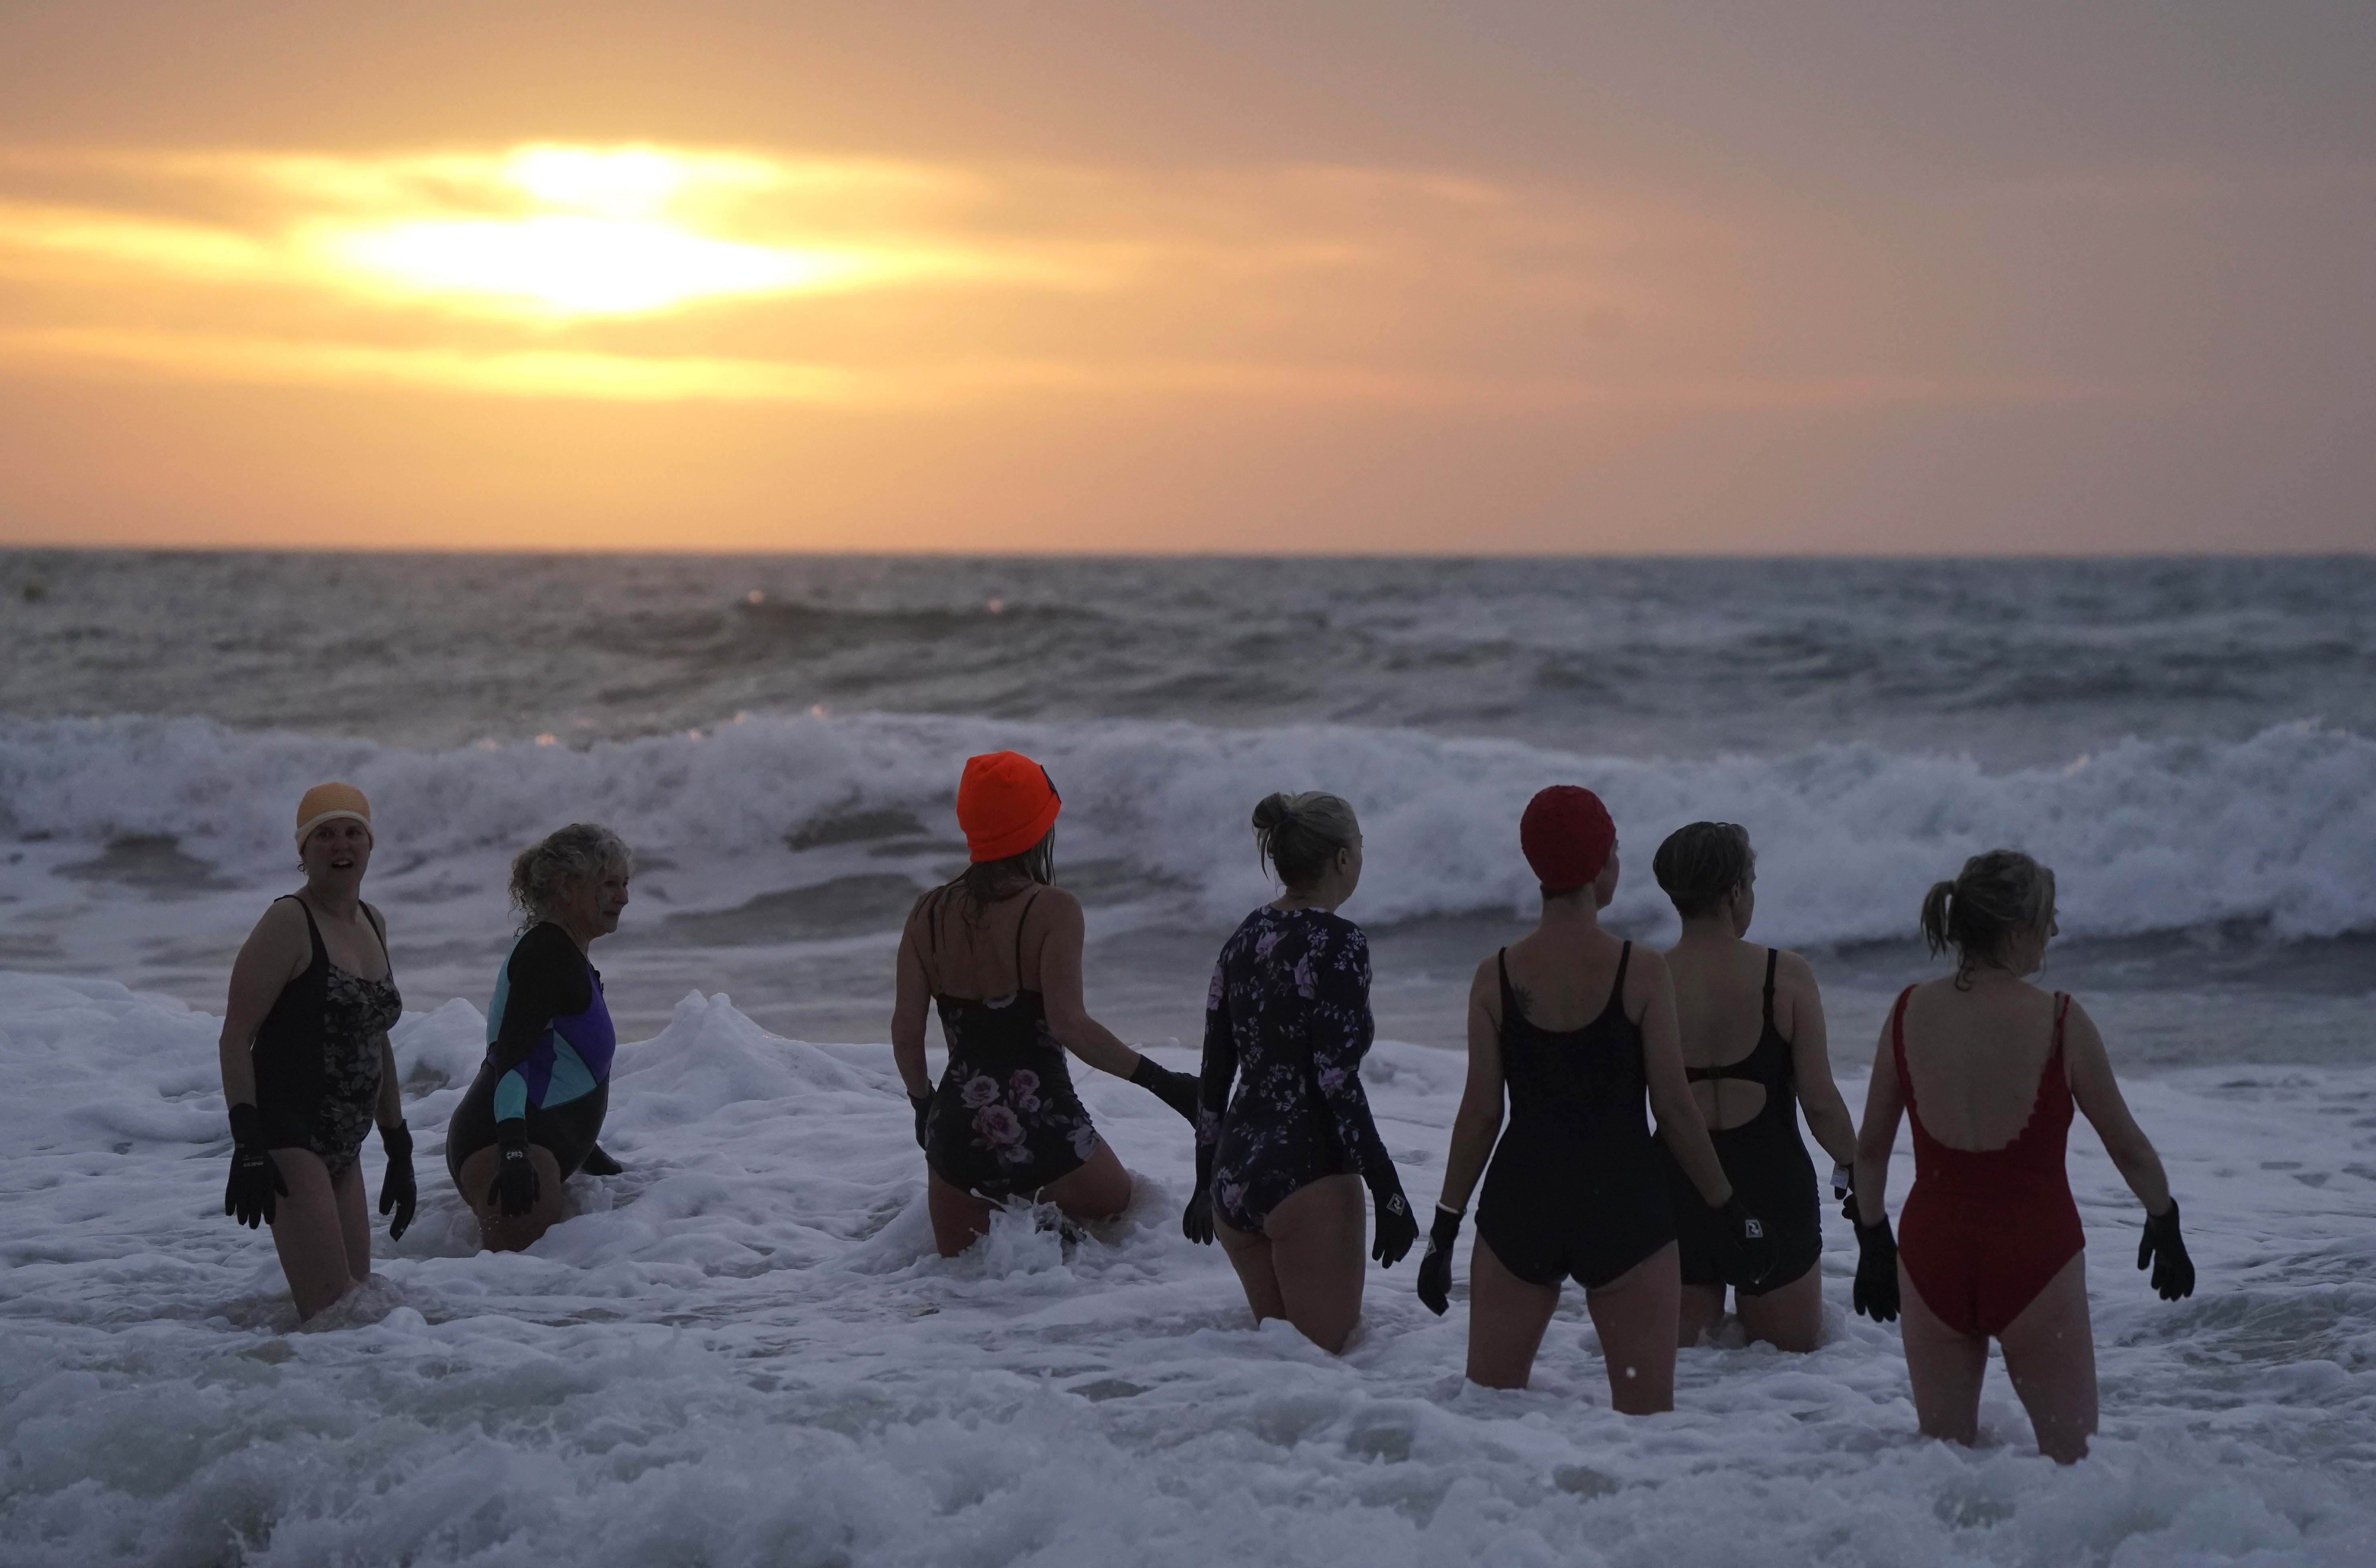 Swimmers make their way out to sea as the sun begins to rise over Boscombe beach in Dorset on New Year’s Day (Andrew Matthews/PA)